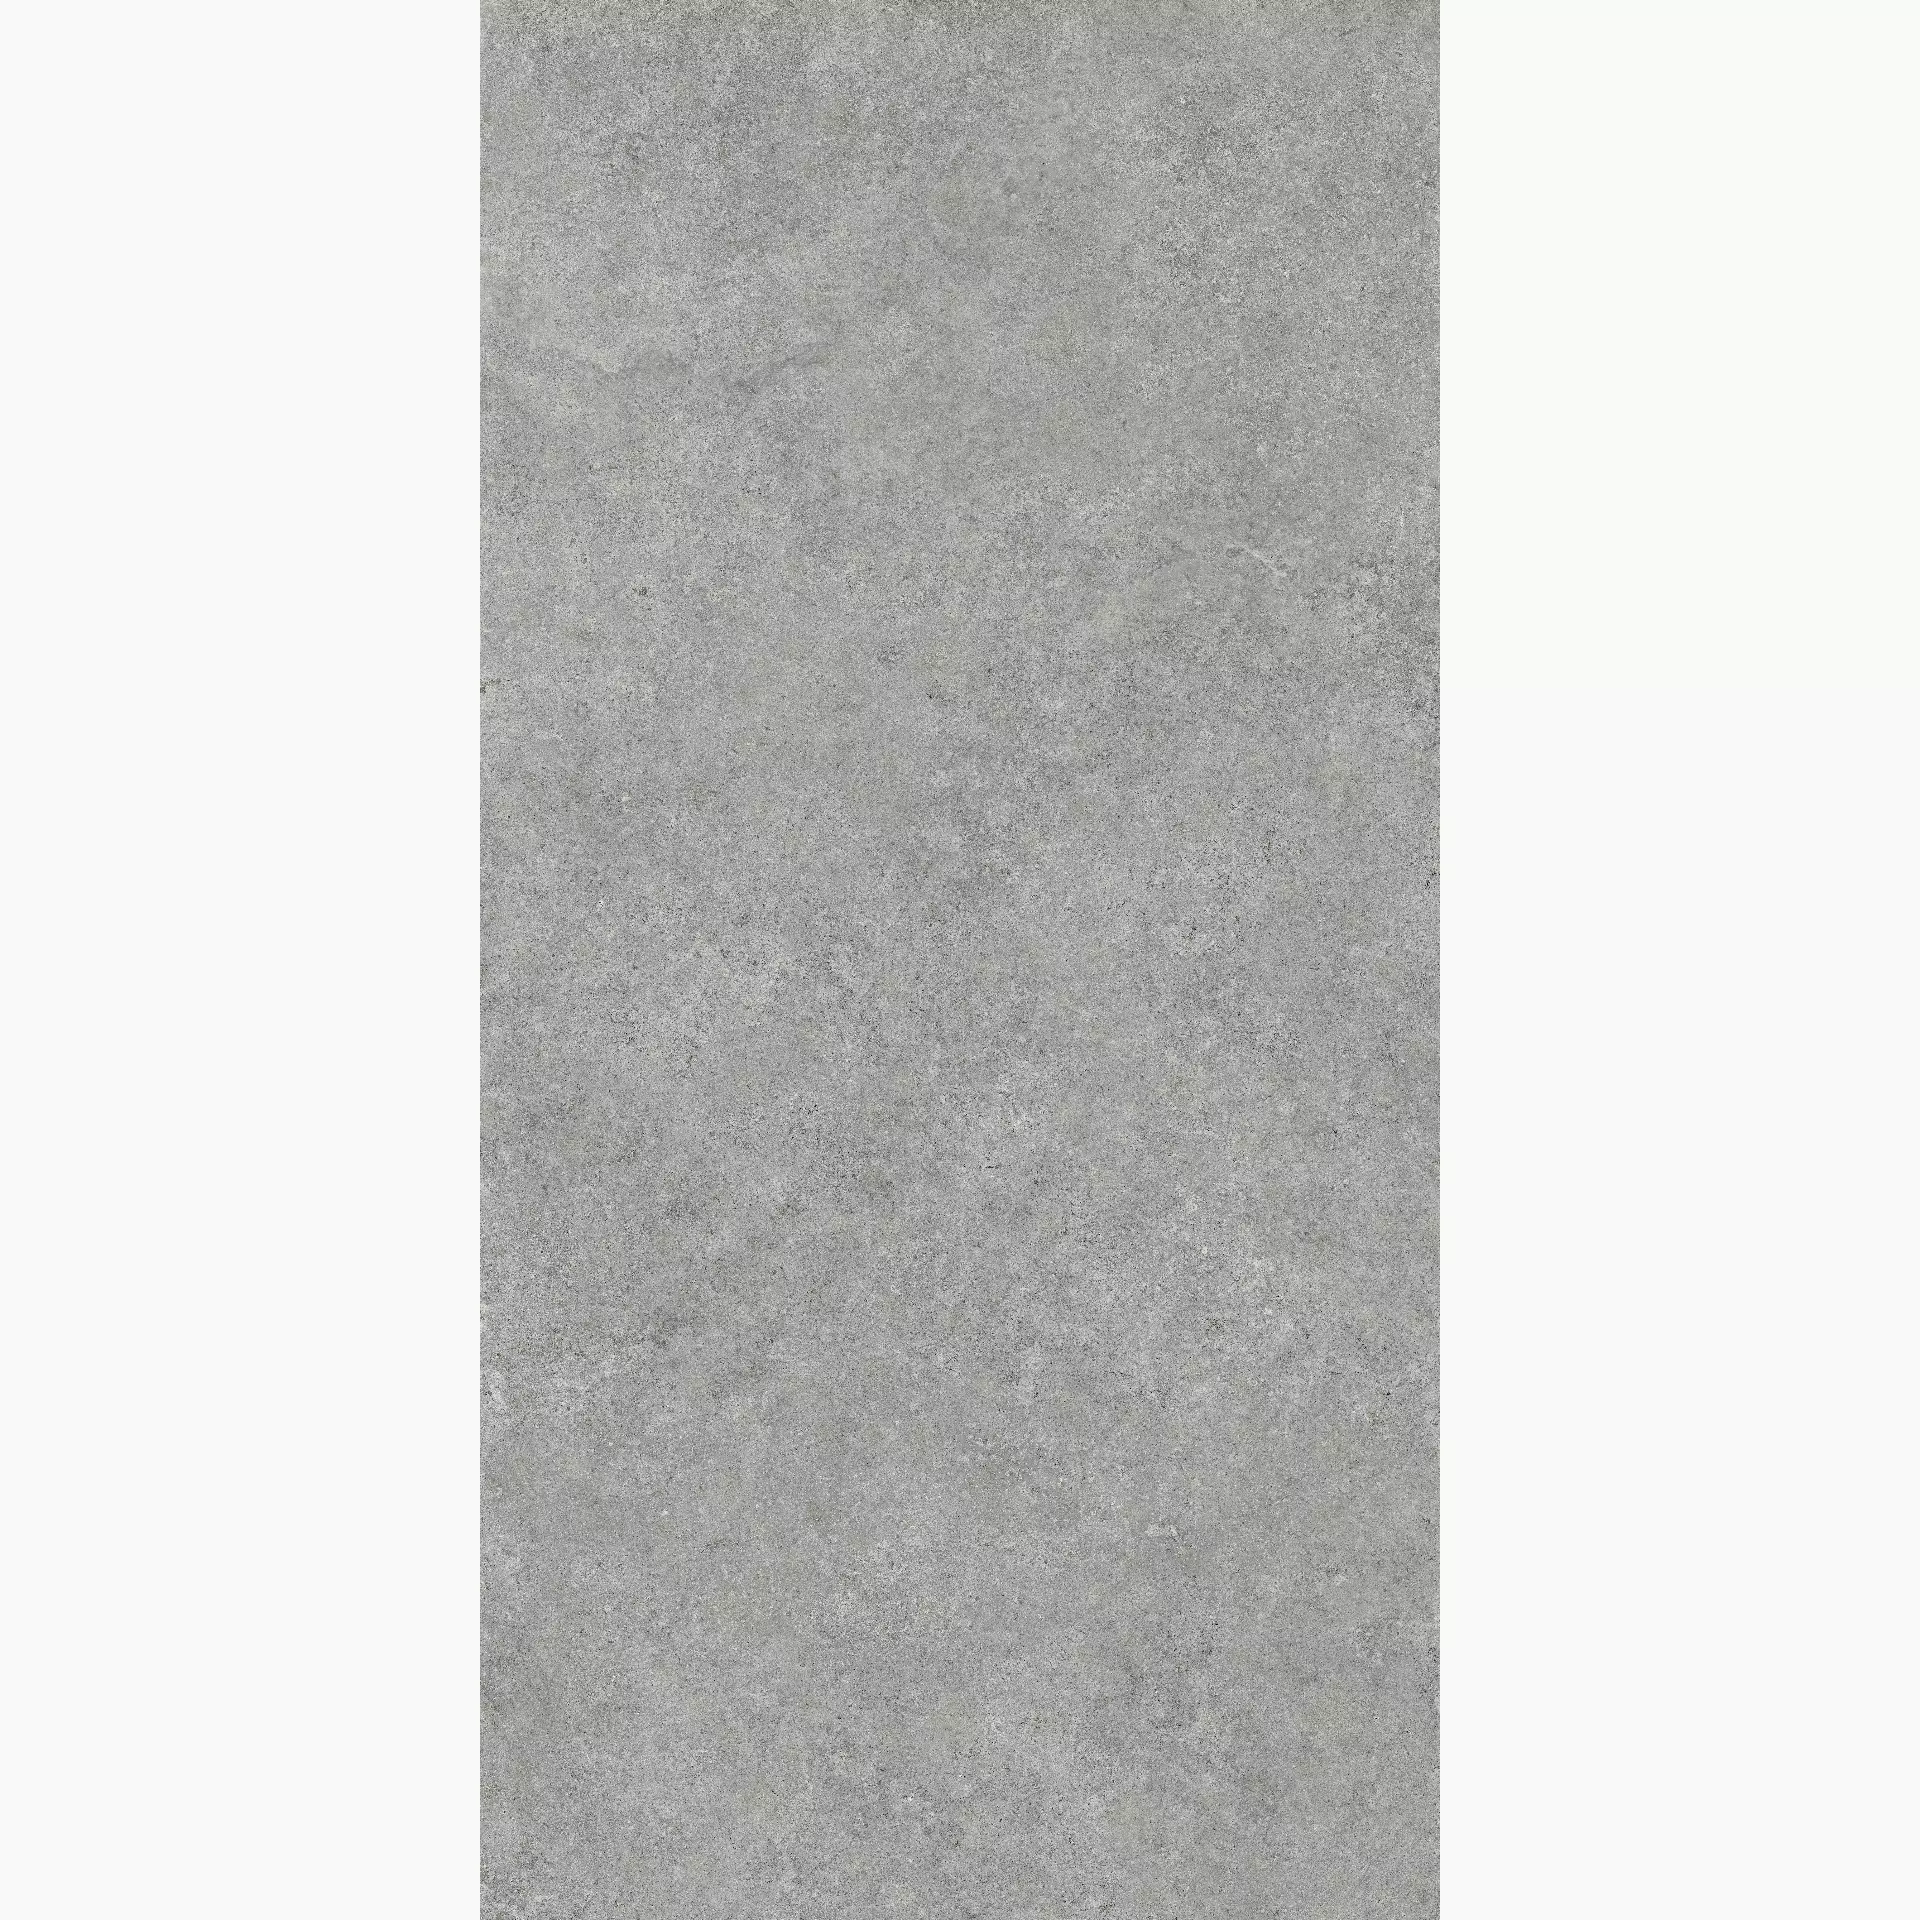 Cottodeste Pura Grey Honed Protect EGXPRH0 60x120cm rectified 14mm